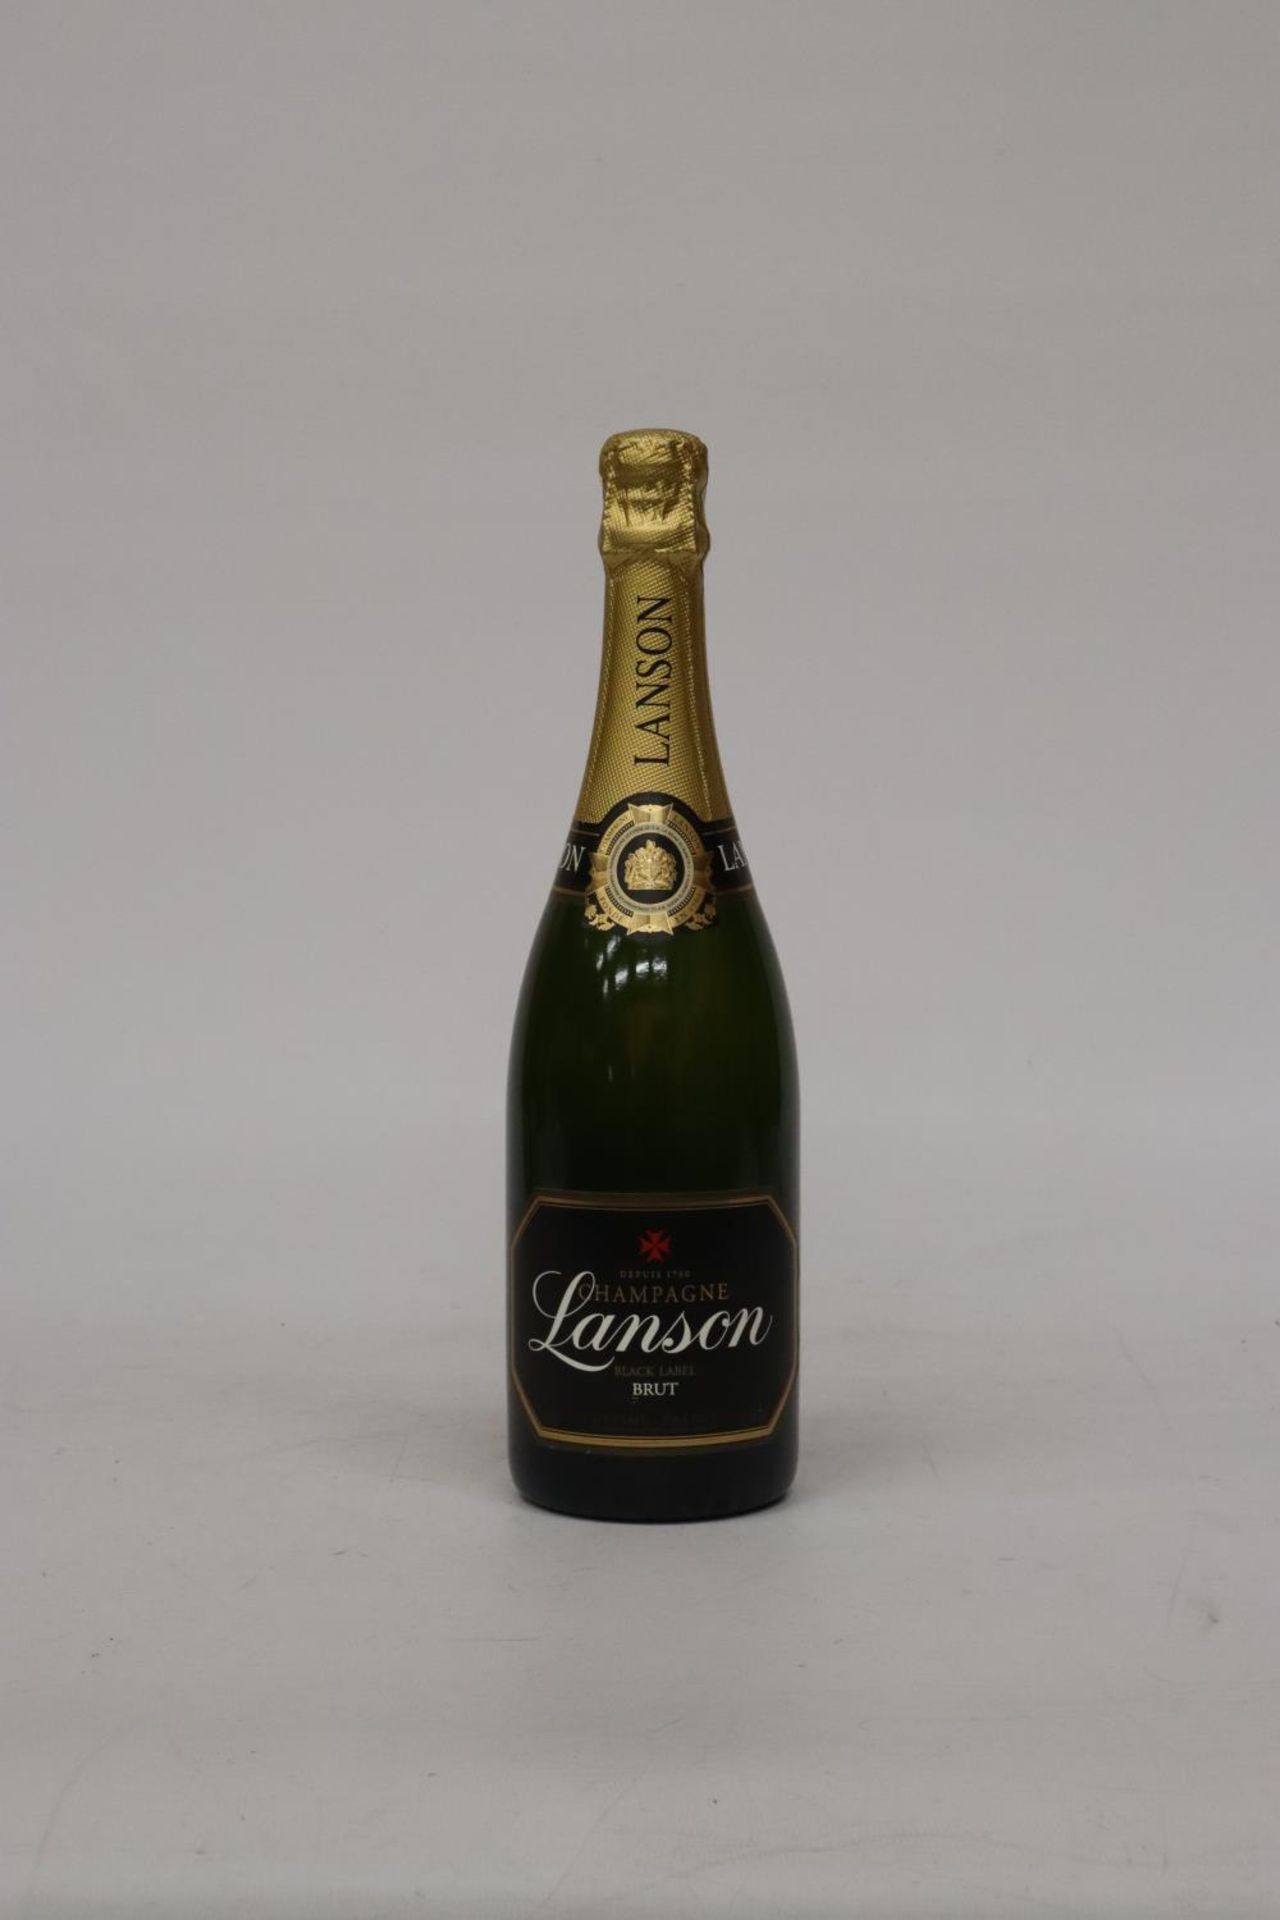 A 75CL BOTTLE OF LANSON CHAMPAGNE